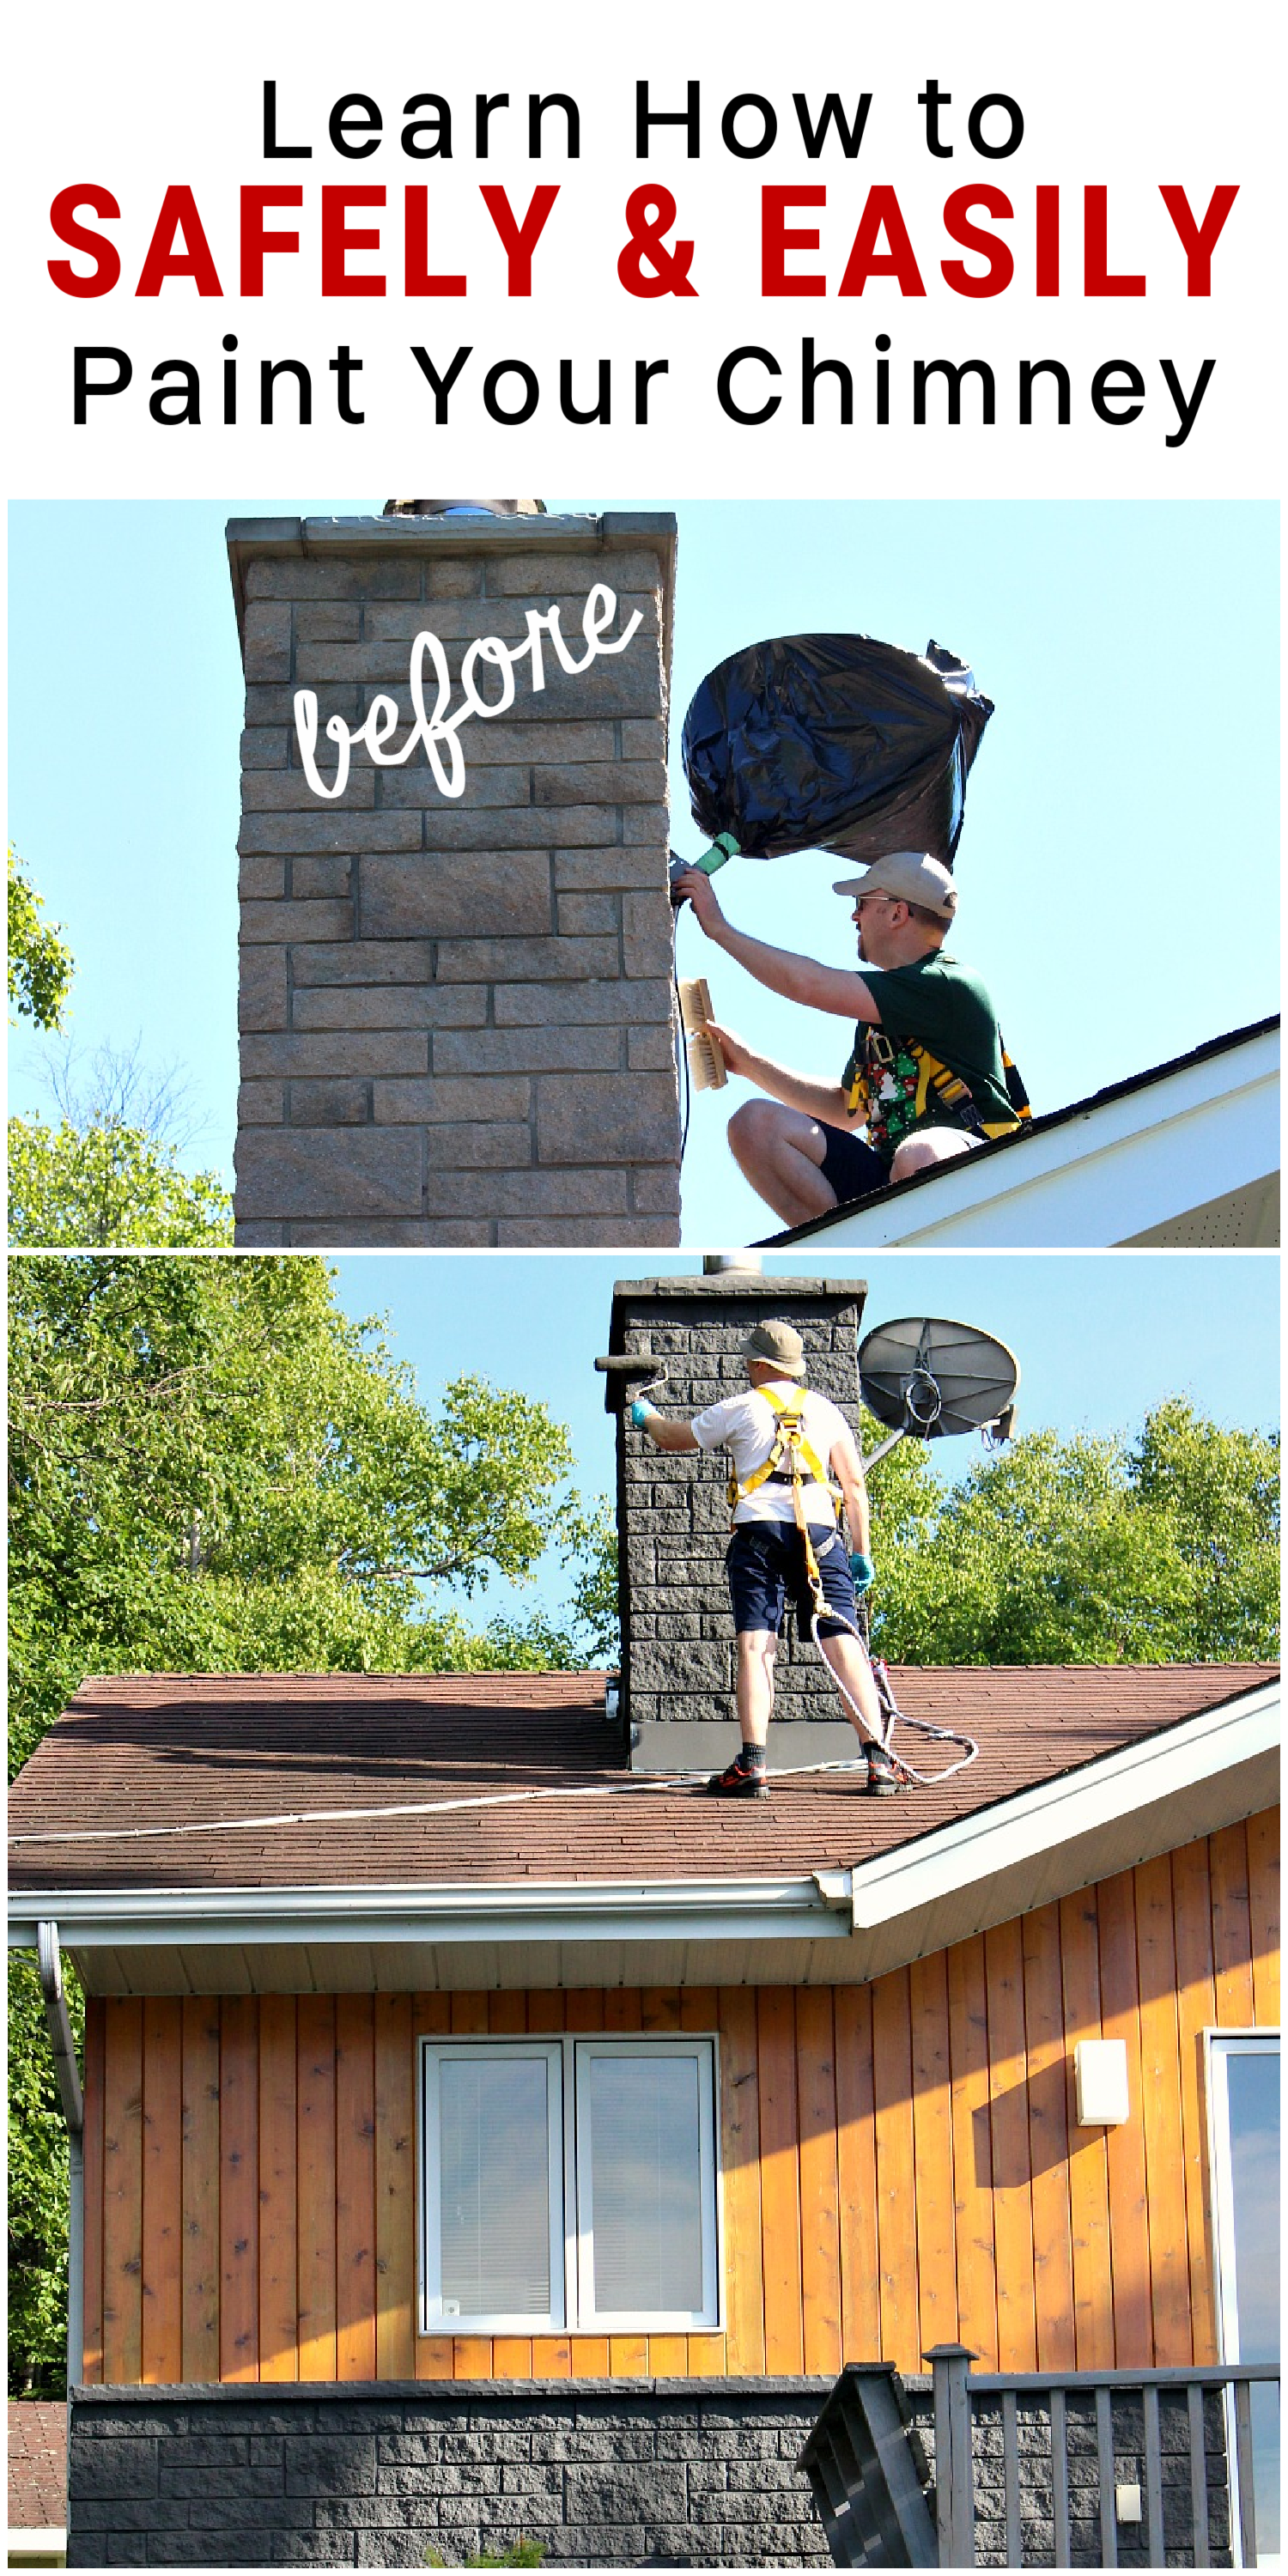 Learn How to Safely and Easily Paint Your Chimney